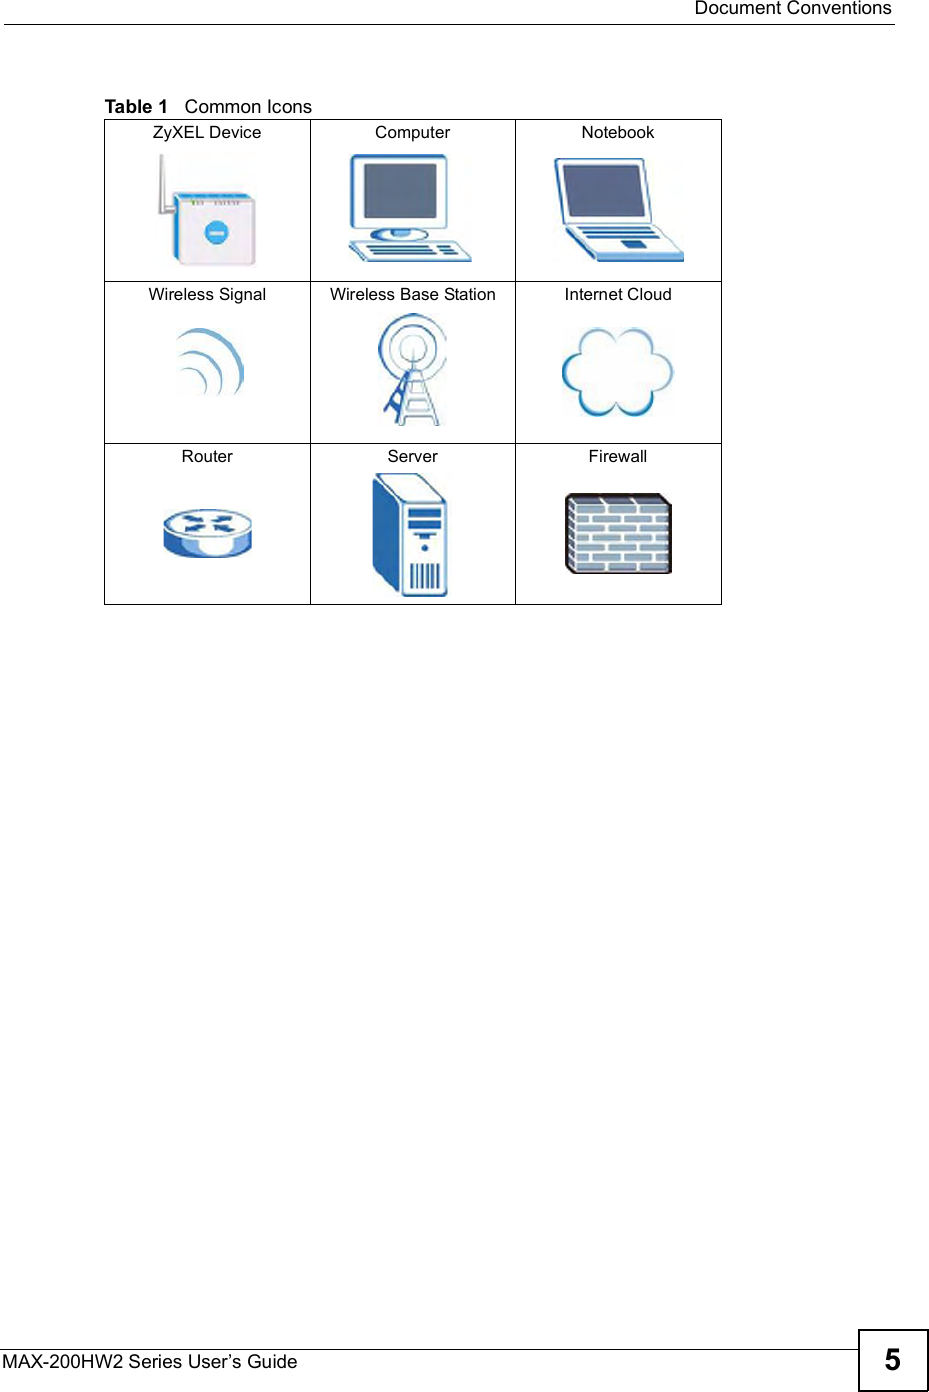  Document ConventionsMAX-200HW2 Series User s Guide 5Table 1   Common IconsZyXEL DeviceComputerNotebookWireless SignalWireless Base StationInternet CloudRouterServerFirewall